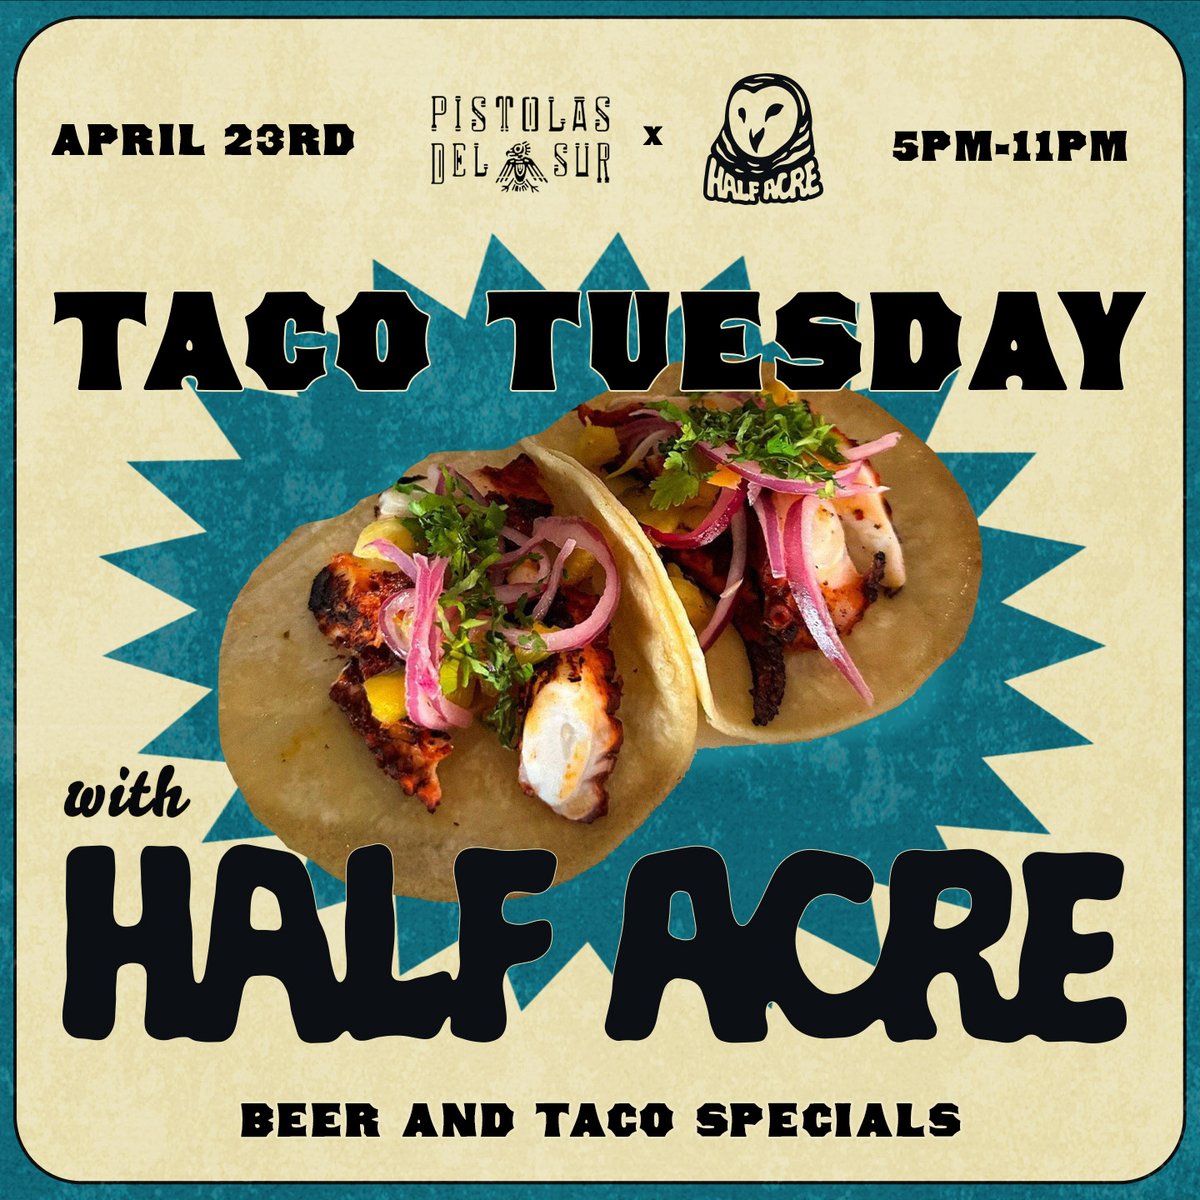 Half Acre is hanging out at @PistolasDelSur for Taco Tuesday this week. Beer + Tacos + More Beer + More Tacos. Seems like the potential for best Tuesday ever.